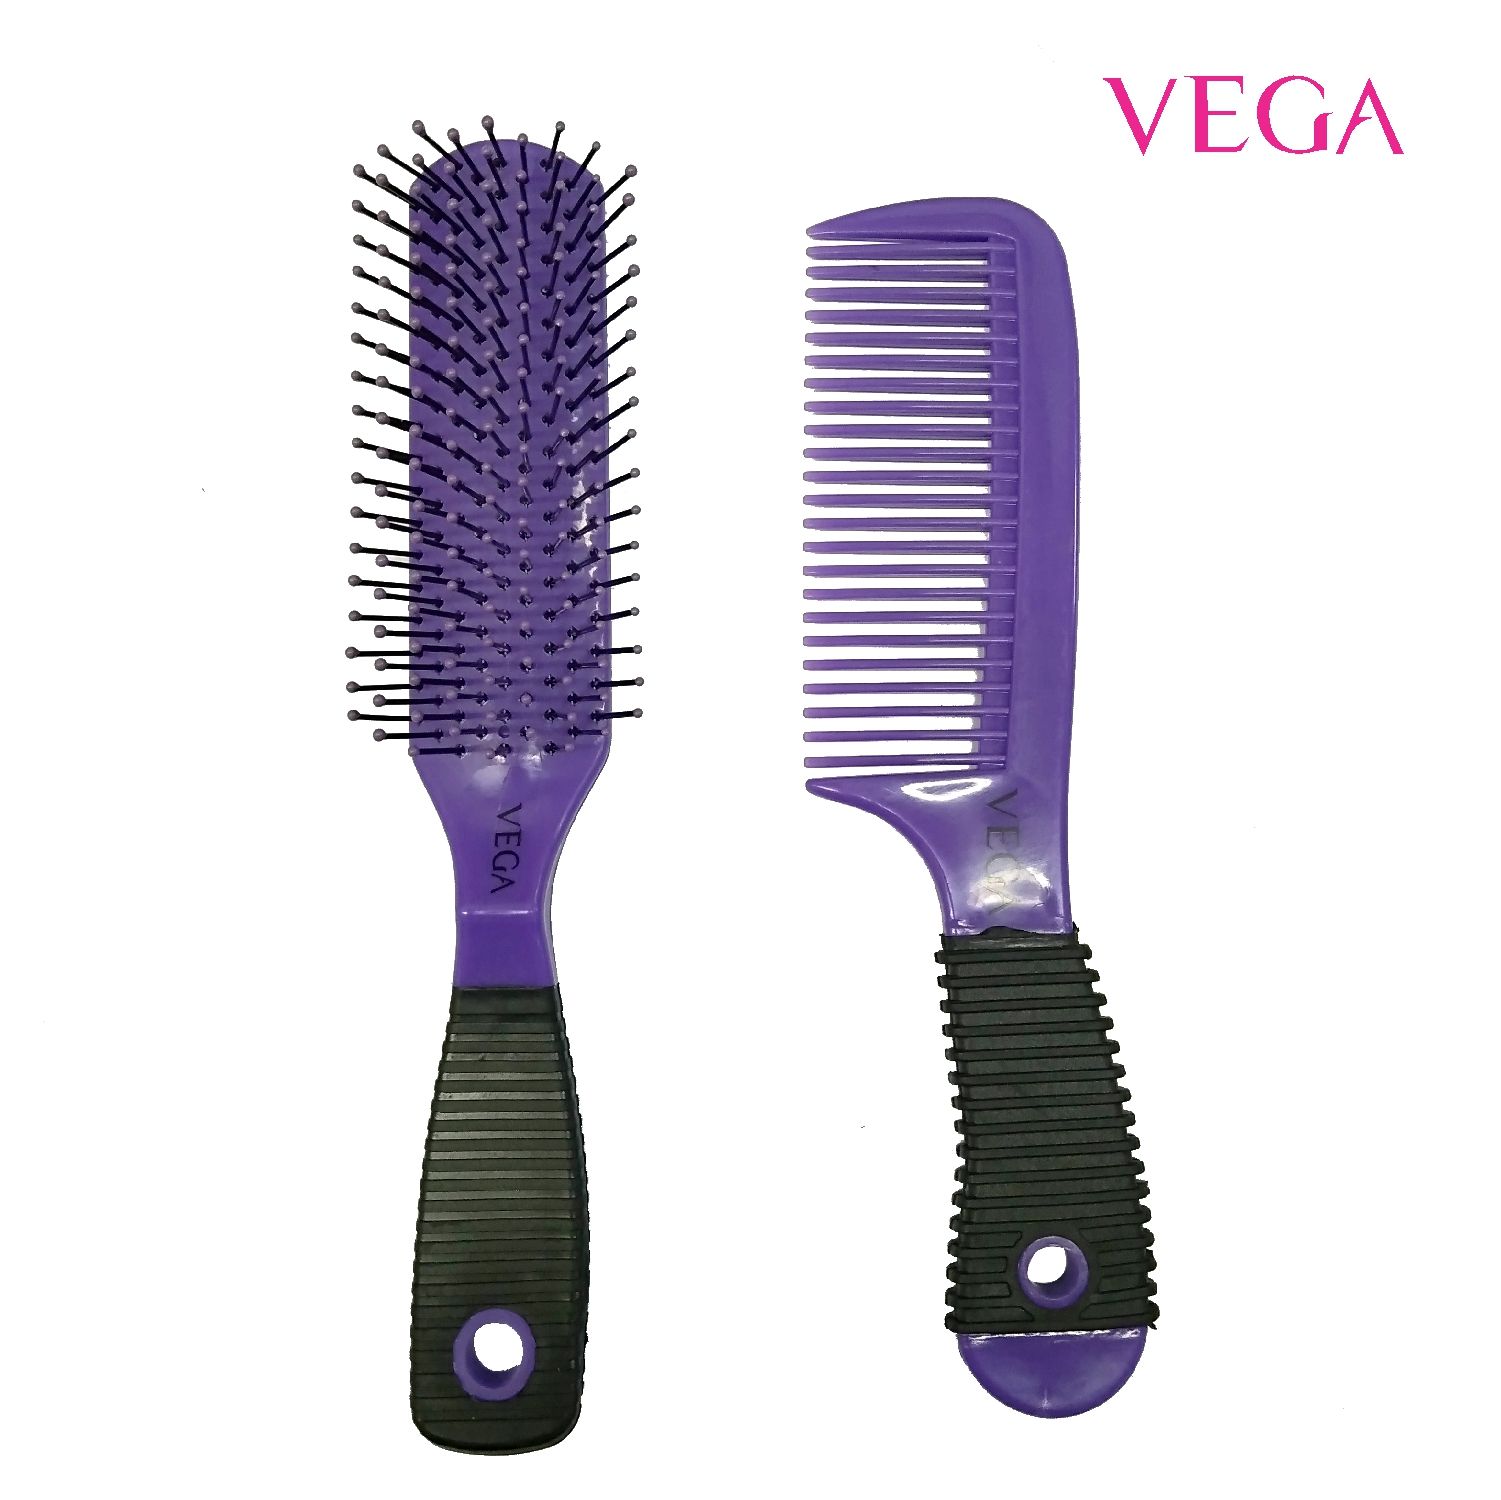 VEGA Hair Grooming Set (HBCS-02)(Color May Vary) Free Comb Worth Rs. 85/-